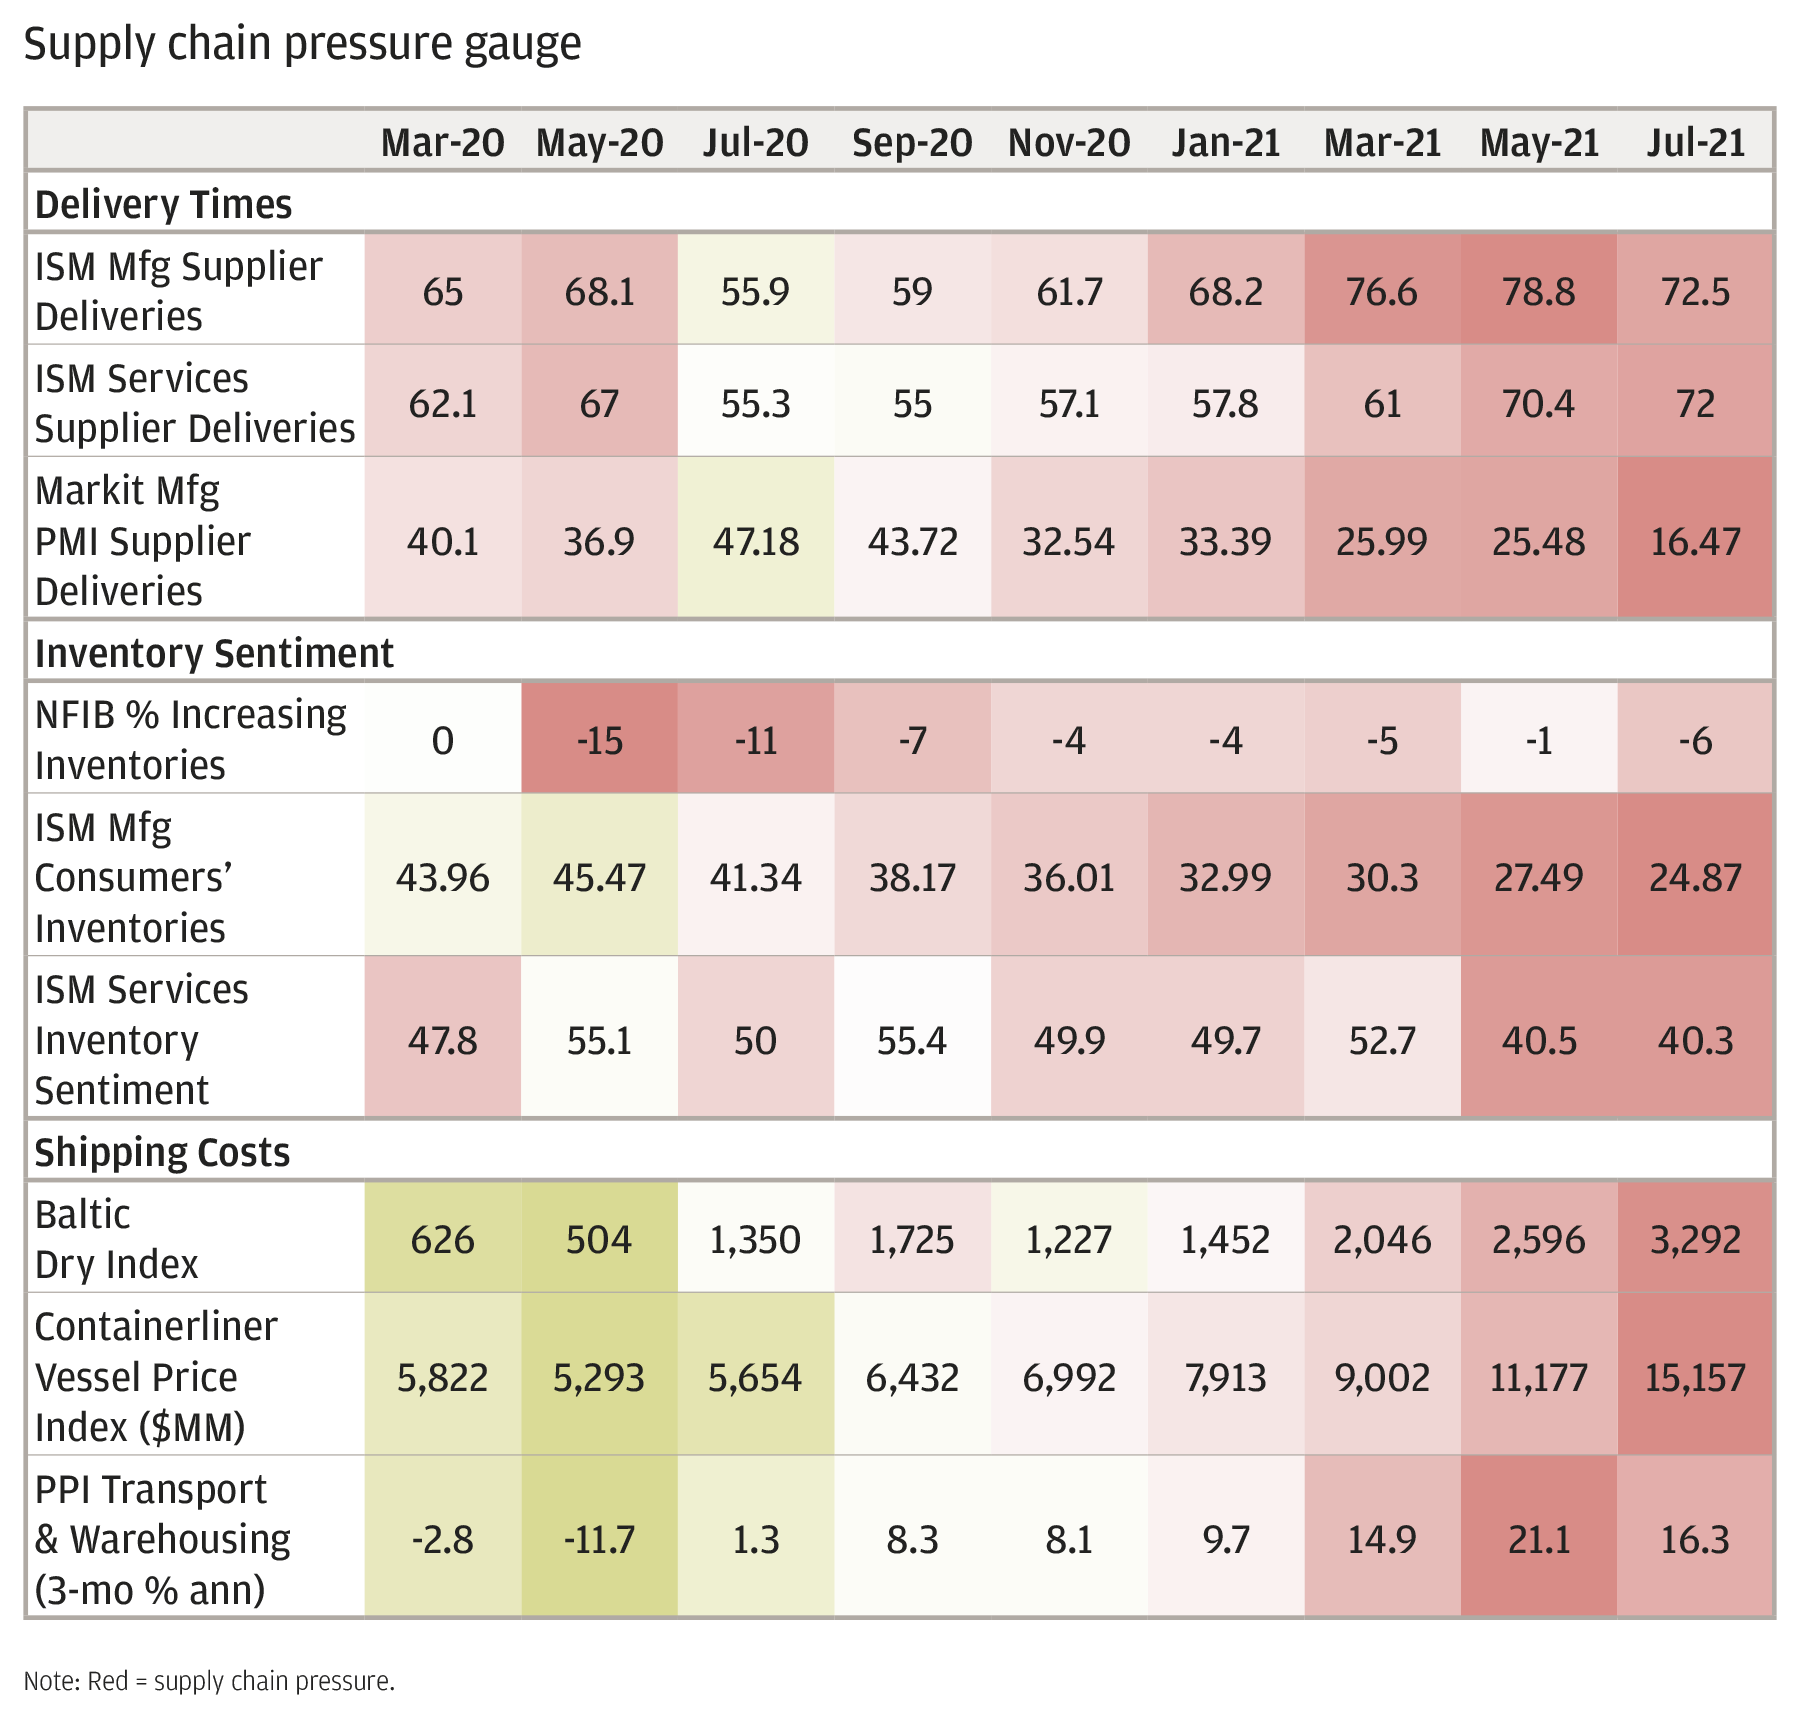 This table tracks key indicators of supply chain pressure, measuring delivery times, inventory sentiment, and shipping costs. The data are color coded, with red indicating supply pressure. Recent data appear as a sea of red.